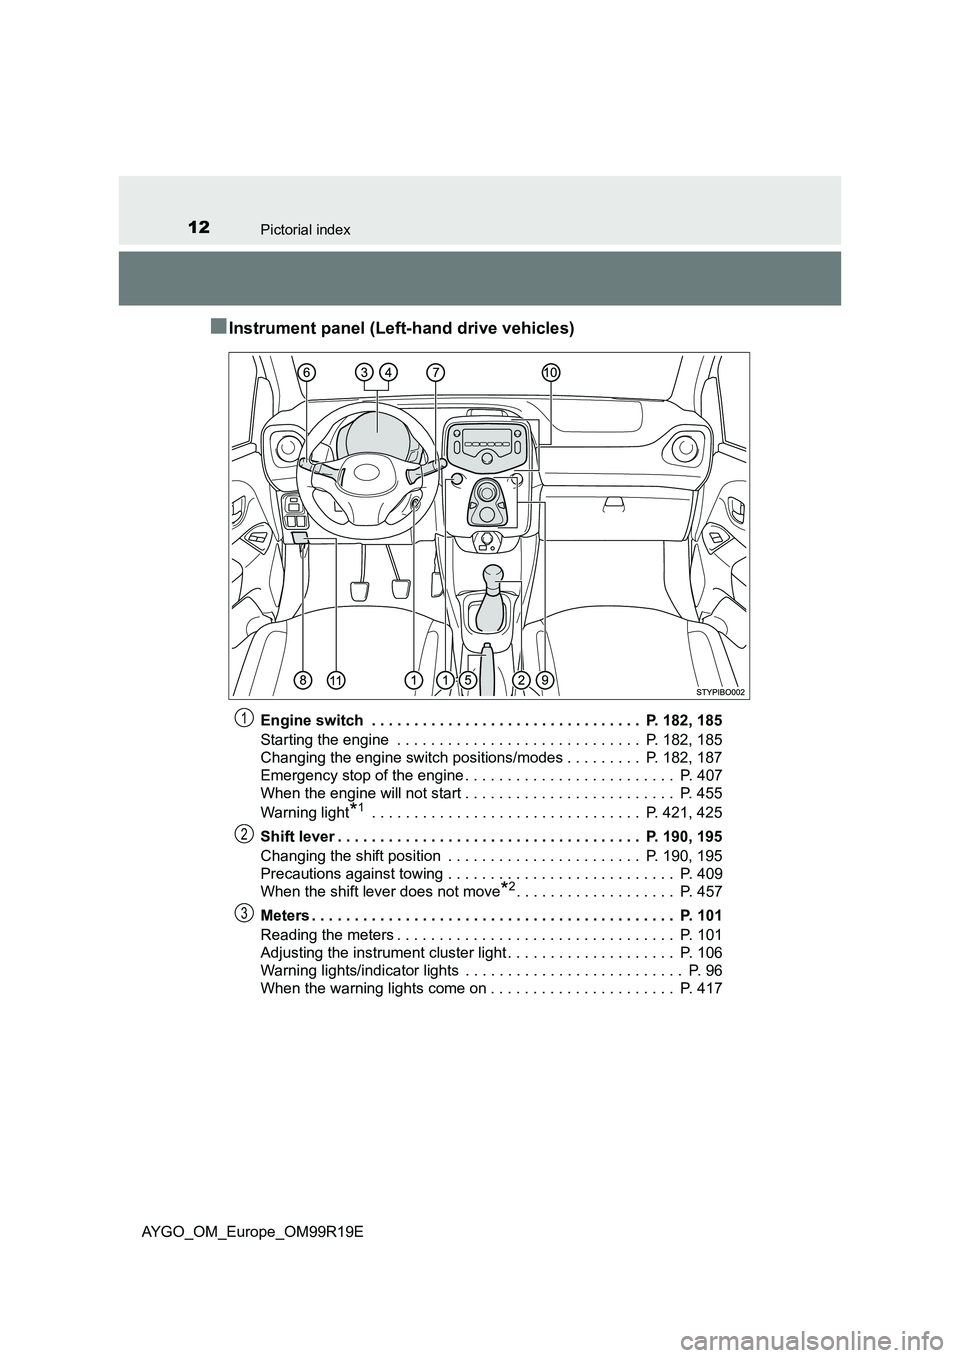 TOYOTA AYGO 2019  Owners Manual (in English) 12Pictorial index
AYGO_OM_Europe_OM99R19E
■Instrument panel (Left-hand drive vehicles)
Engine switch  . . . . . . . . . . . . . . . . . . . . . . . . . . . . . . . .  P. 182, 185 
Starting the engin